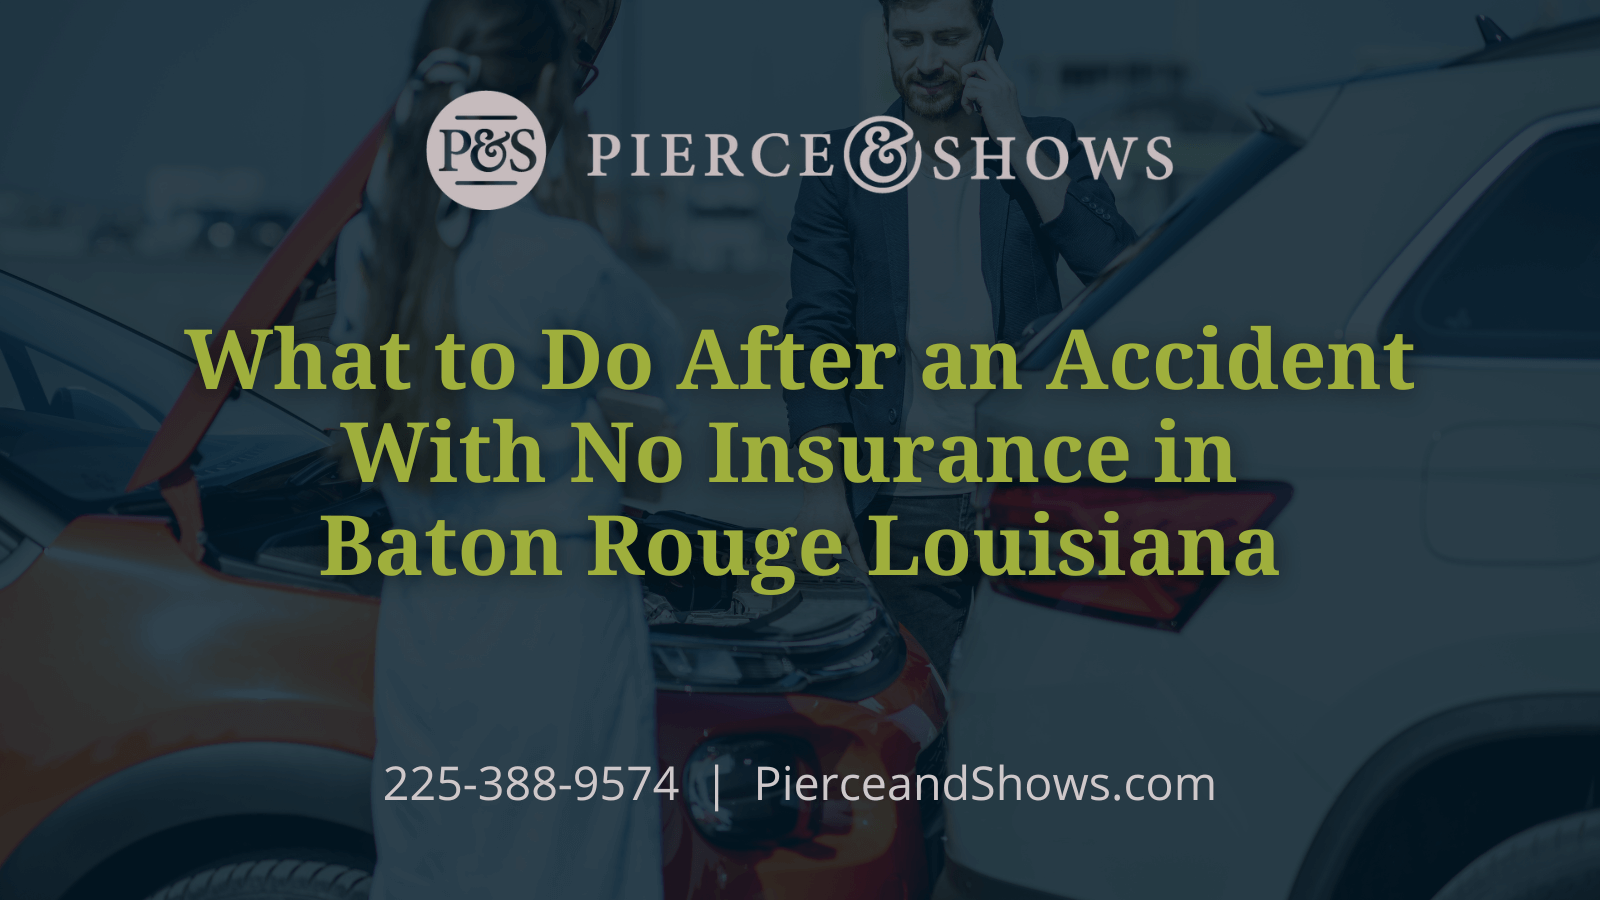 What to Do After an Accident With No Insurance in Baton Rouge Louisiana - Baton Rouge Louisiana injury attorney Pierce & Shows